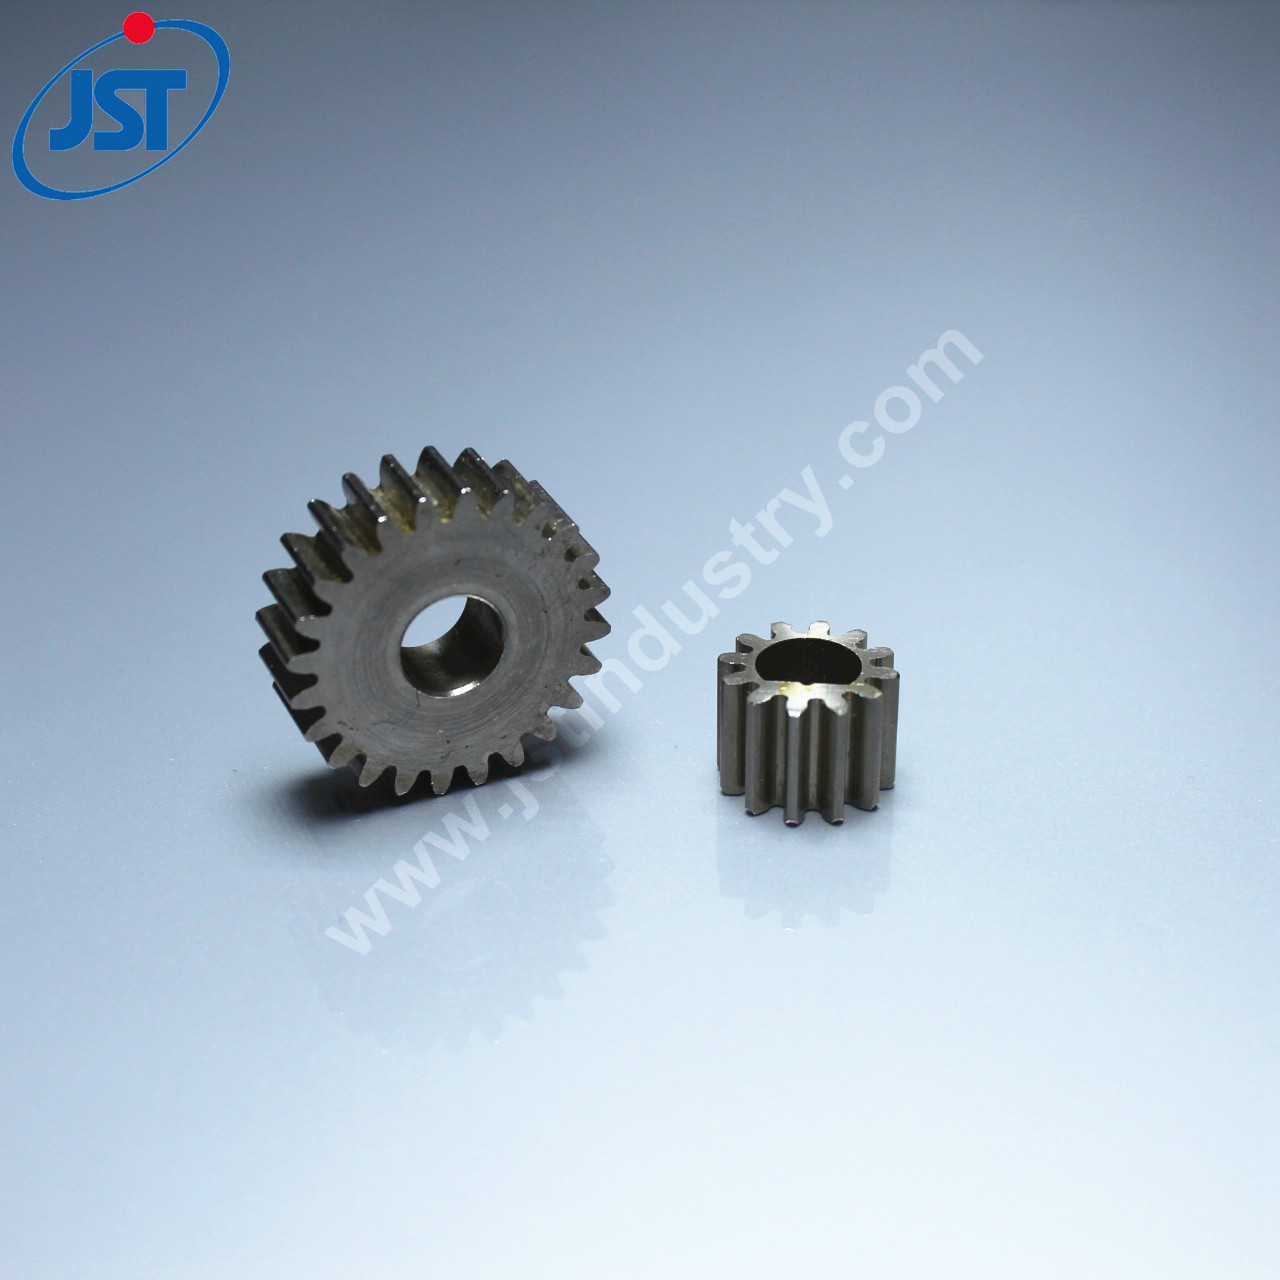 Power Your Machinery with Precision: Discover JST Technology's Small Gears and Pinions